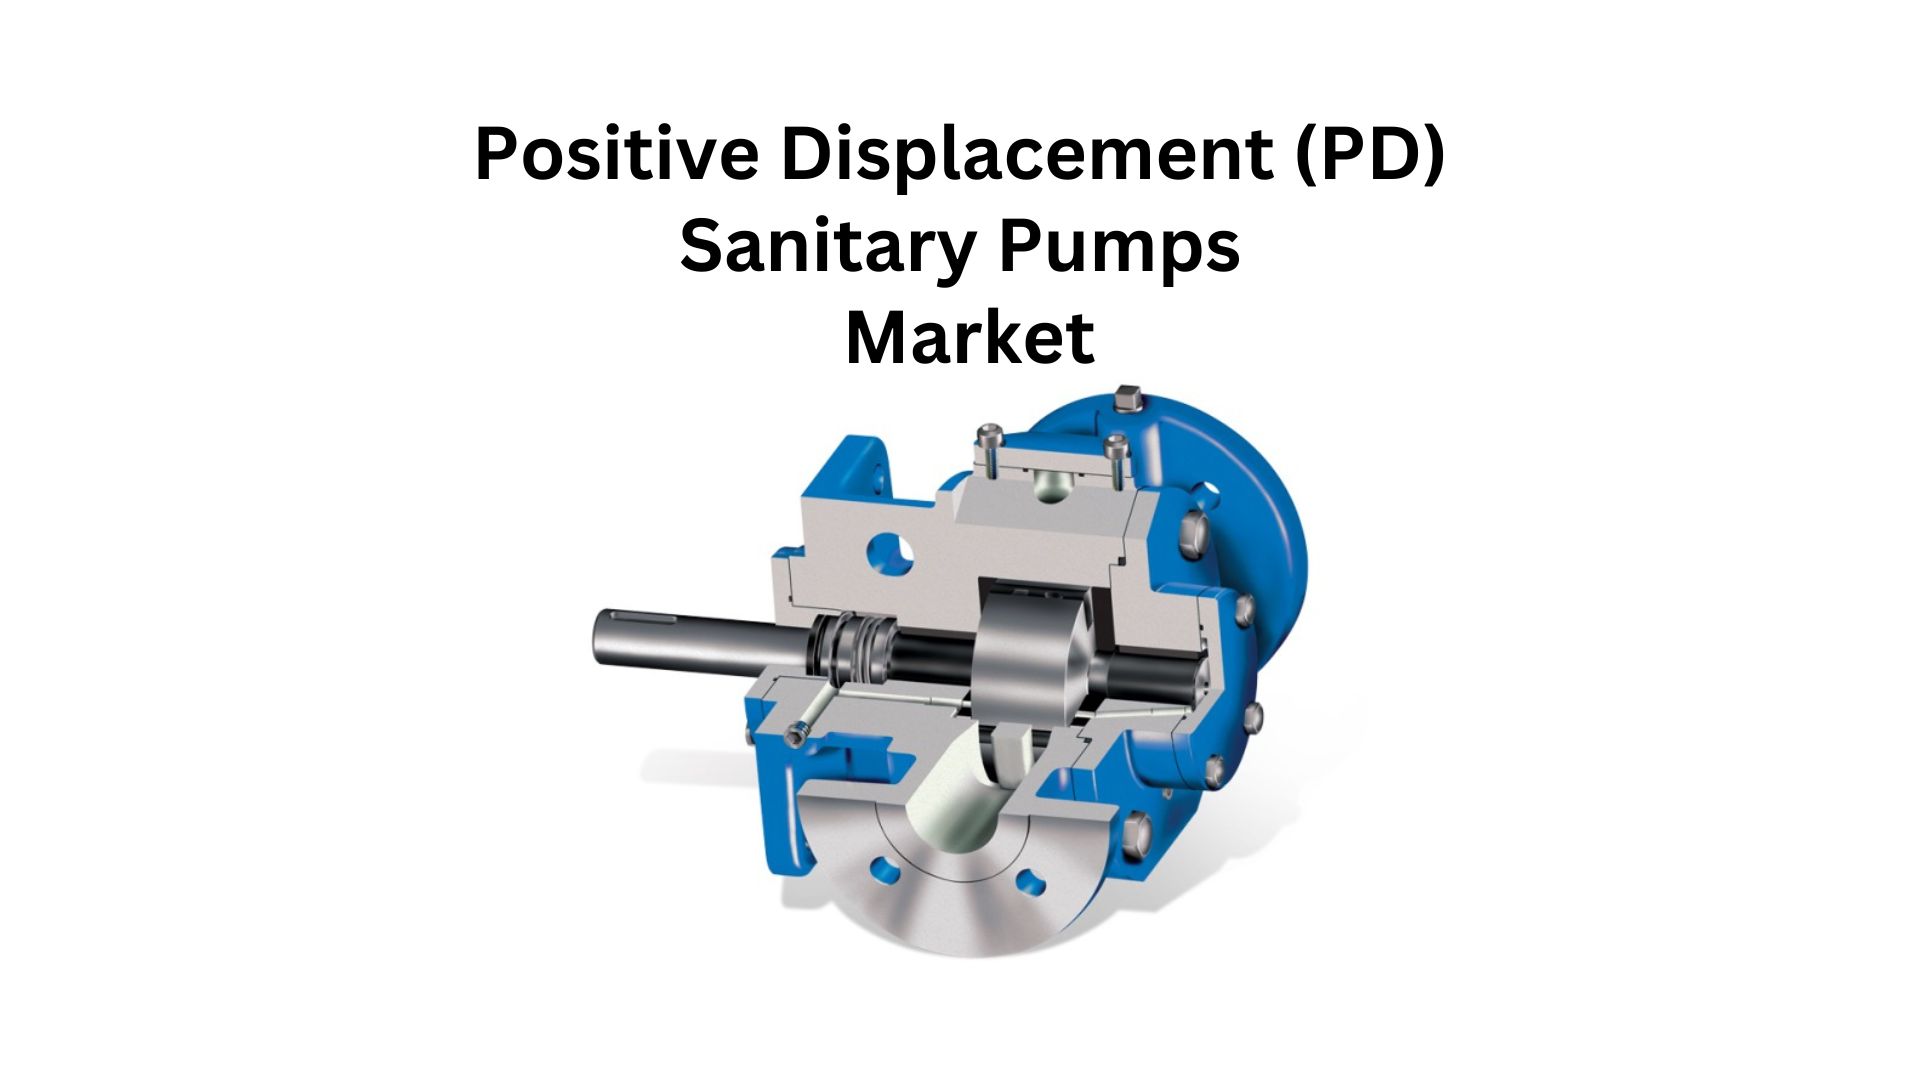 Growth of the Positive Displacement (PD) Sanitary Pumps Market Driven by Improvements in Product Design | CAGR of 9.99%